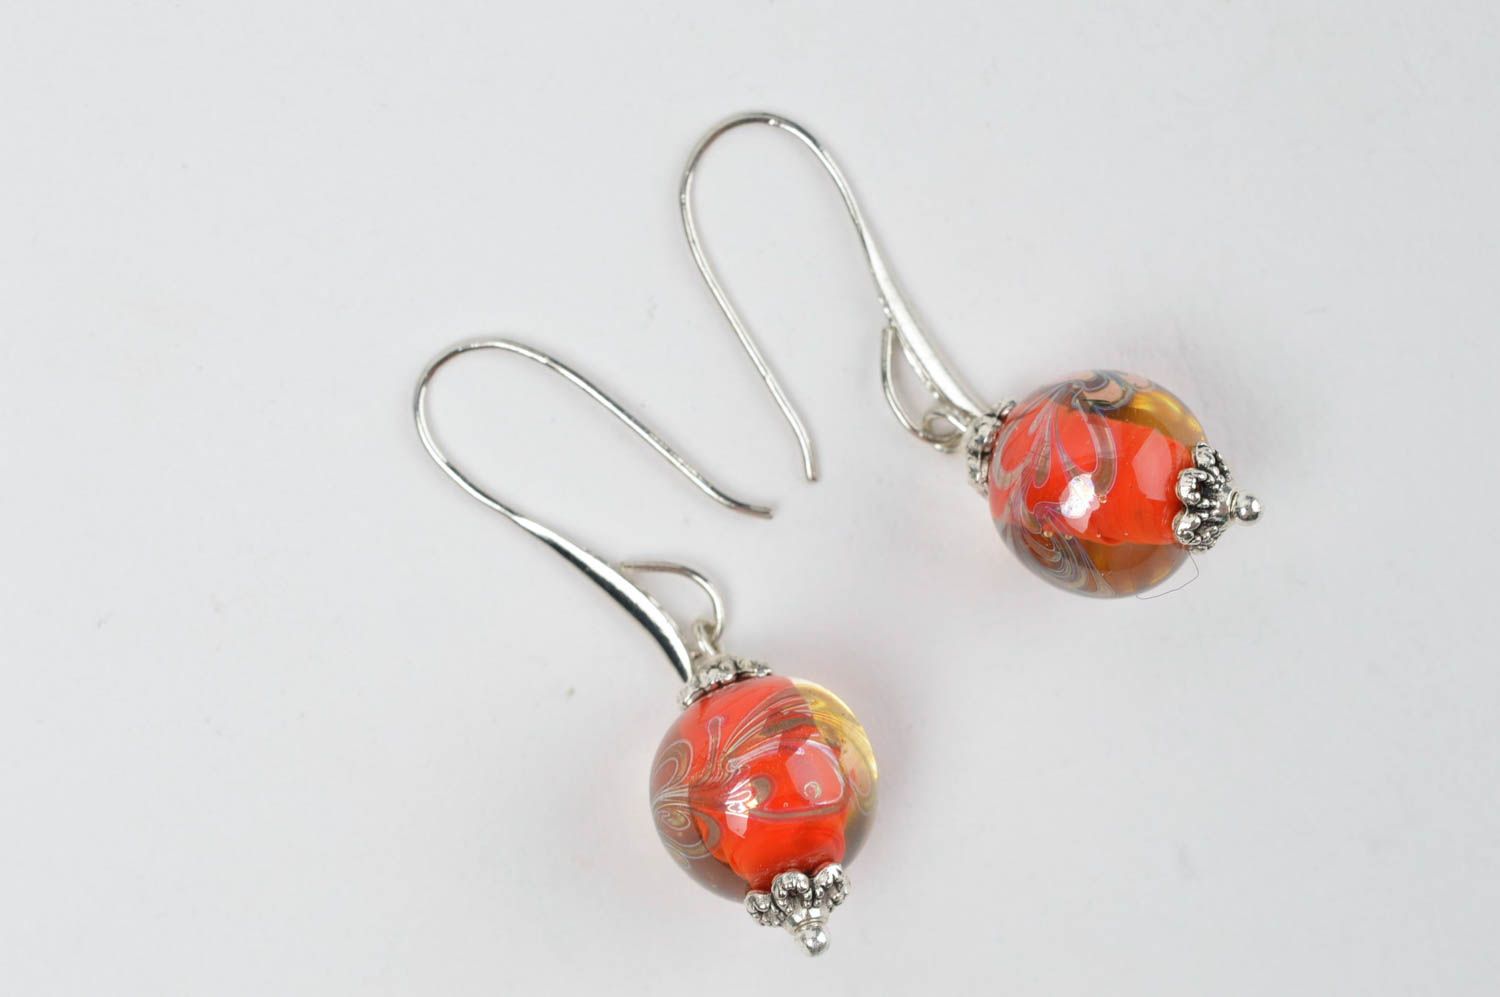 Handmade earrings with charms glass earrings lampwork accessories glass jewelry photo 2